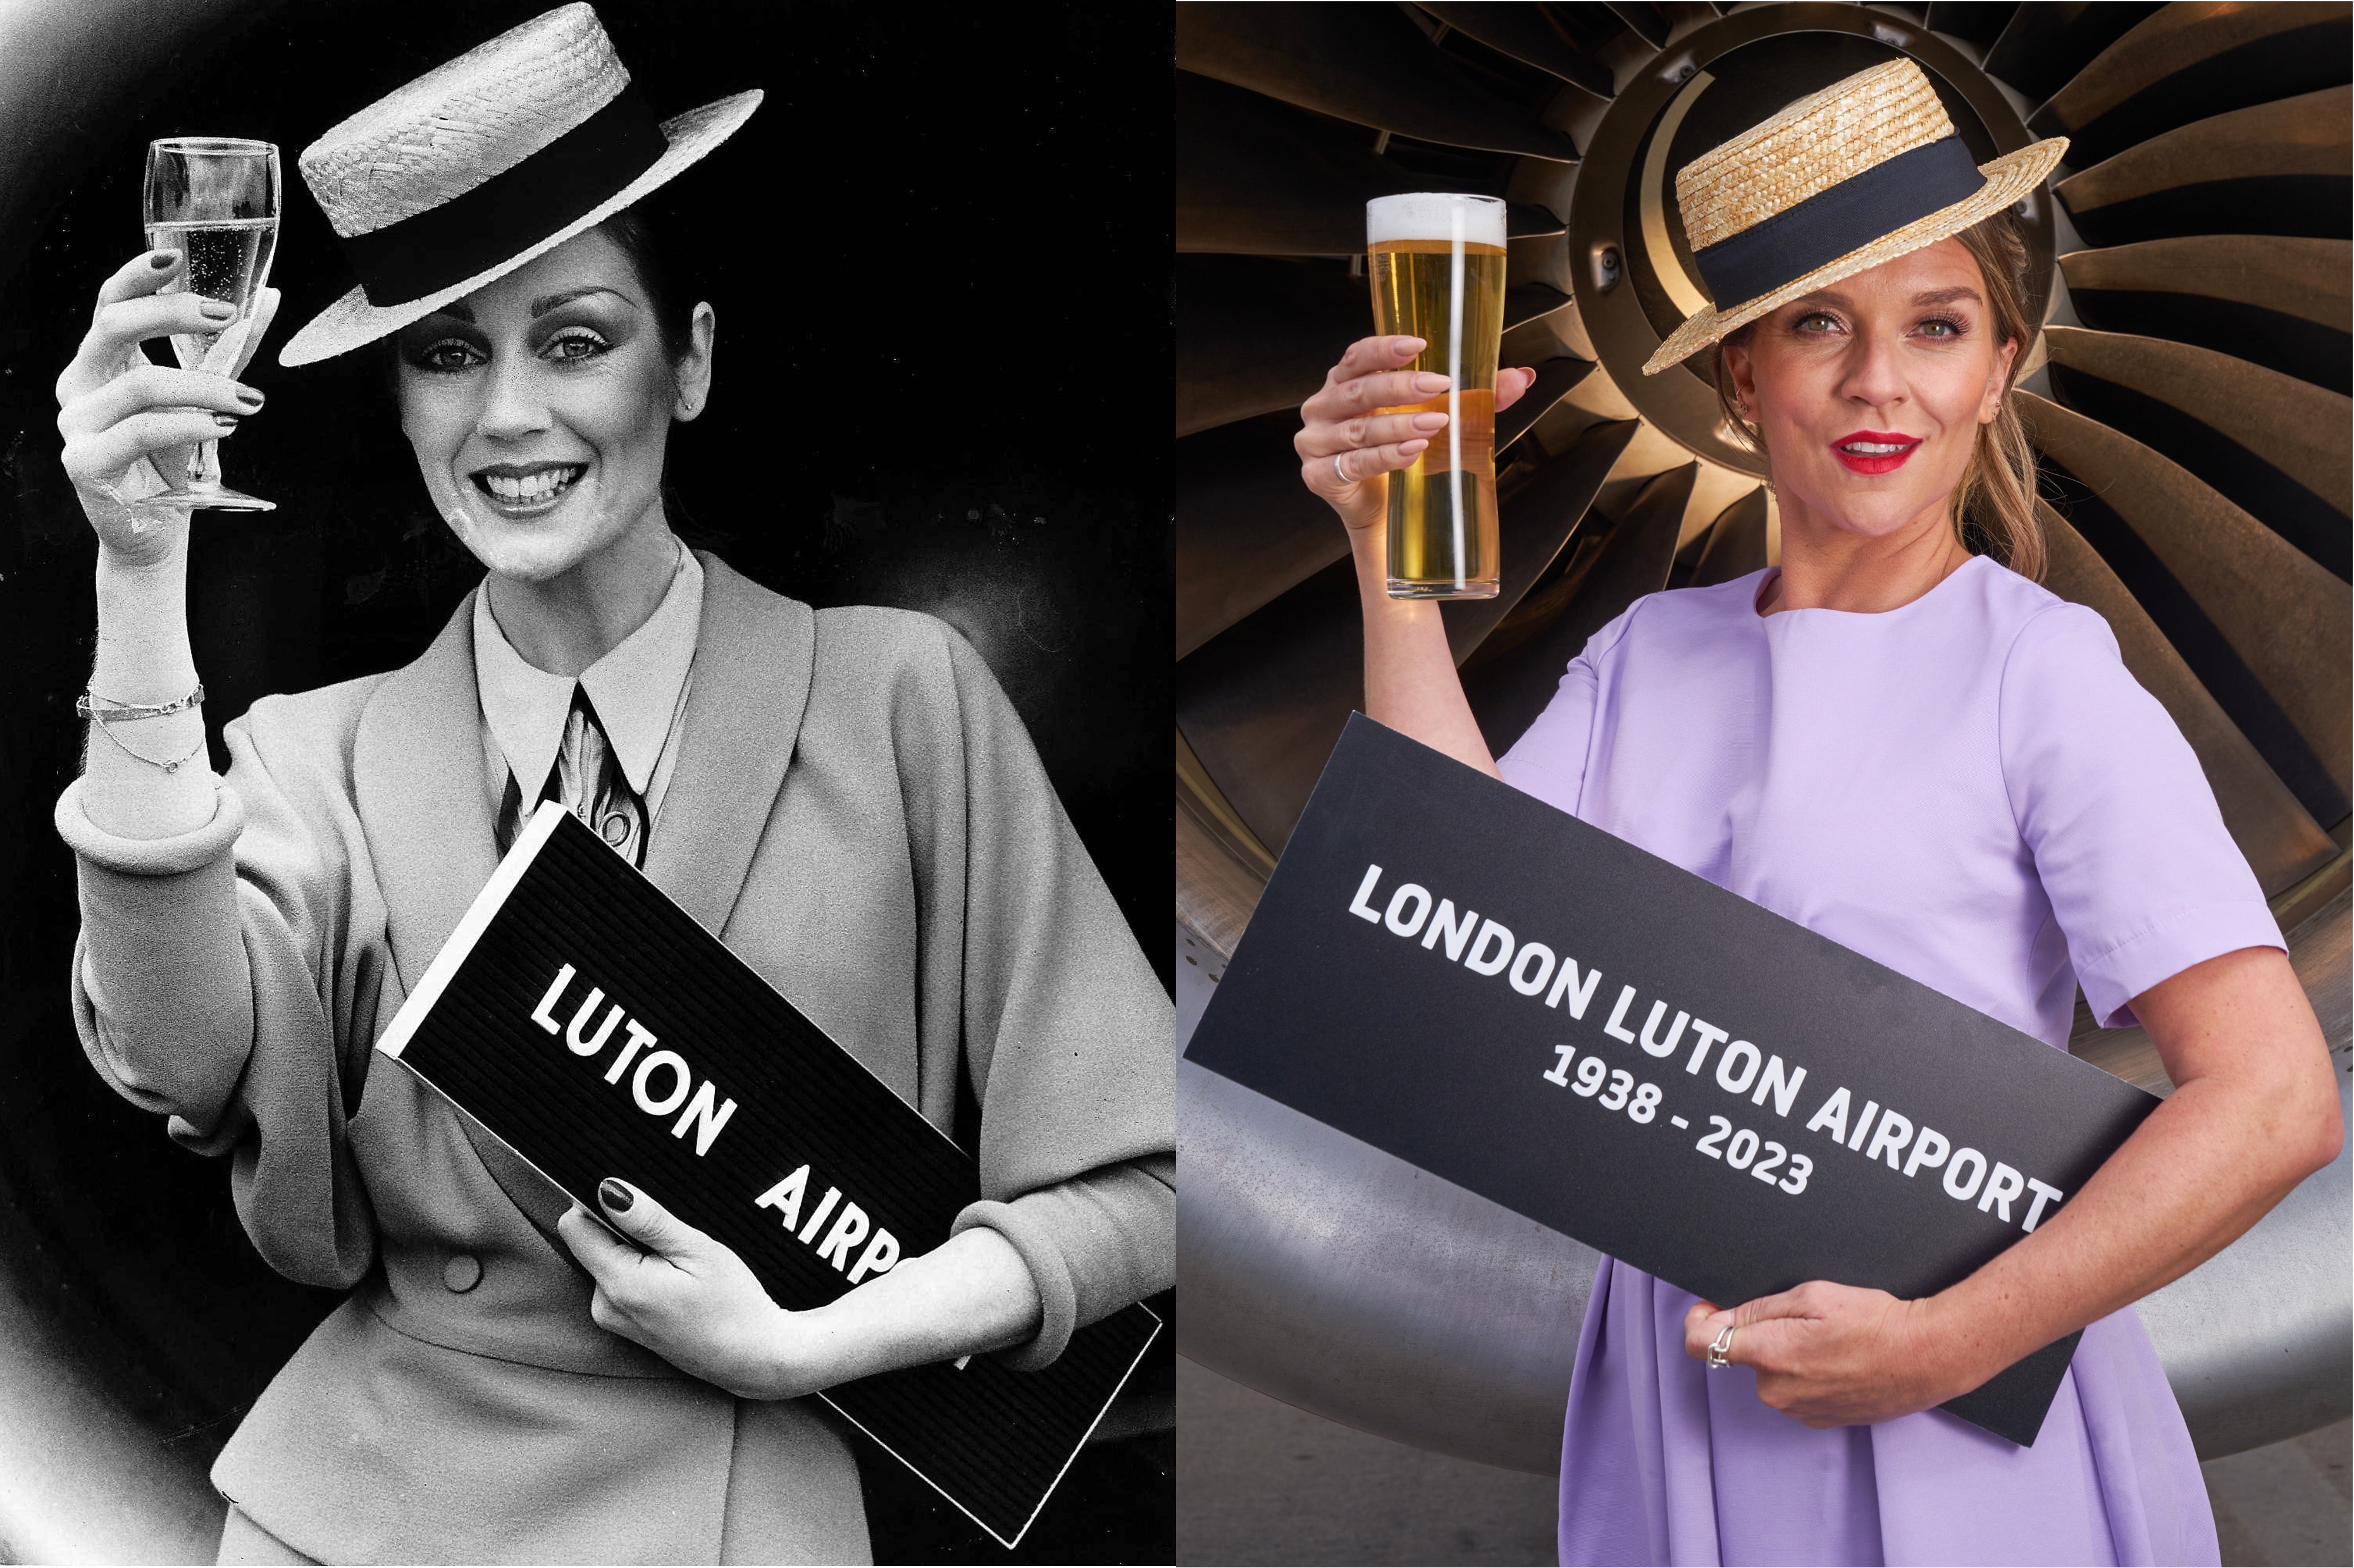 Candice replicated the iconic Lorraine Chase London Luton Airport image while on her visit